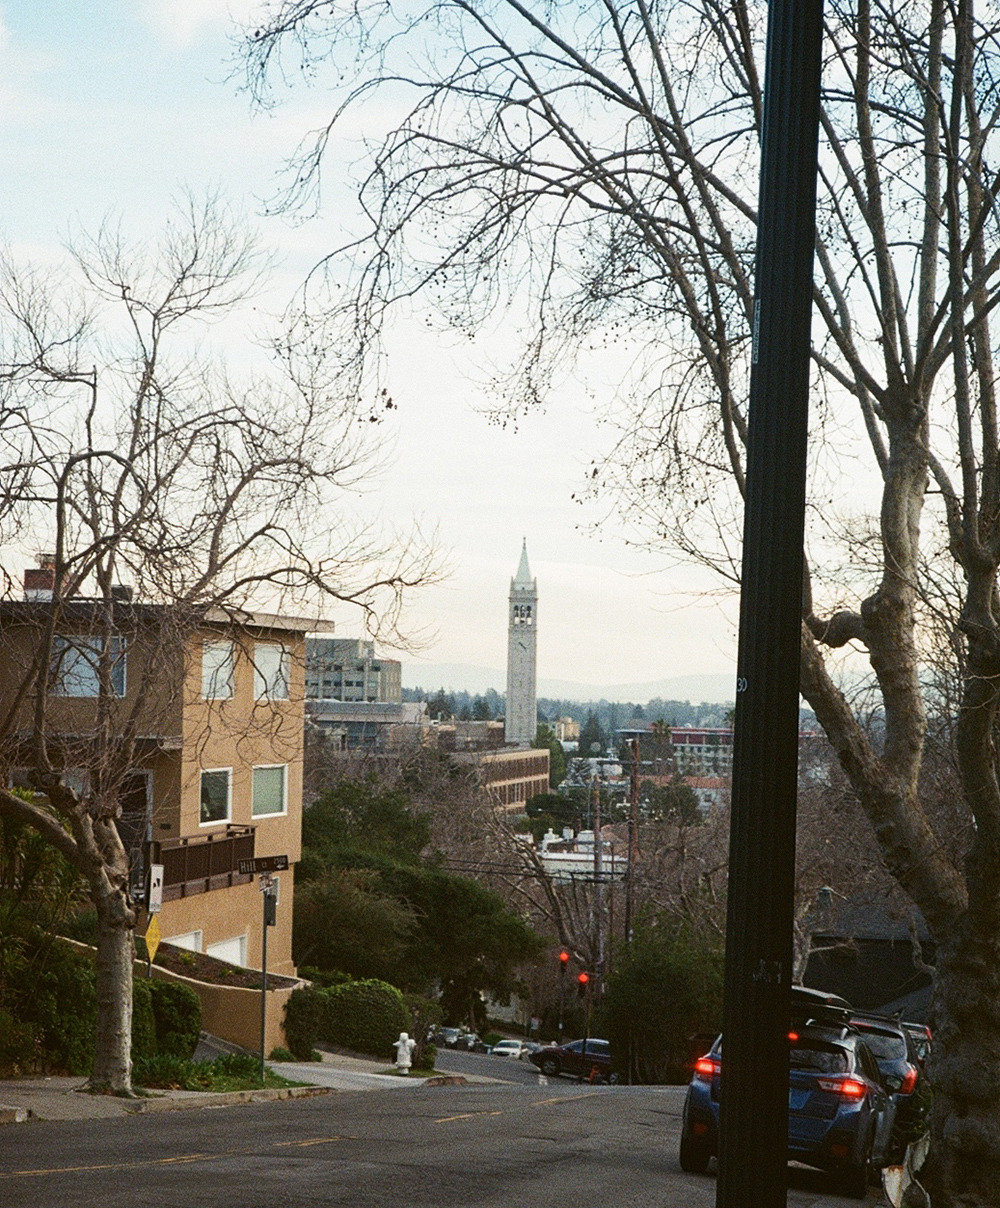 photo of the Campanile and Berkeley streets